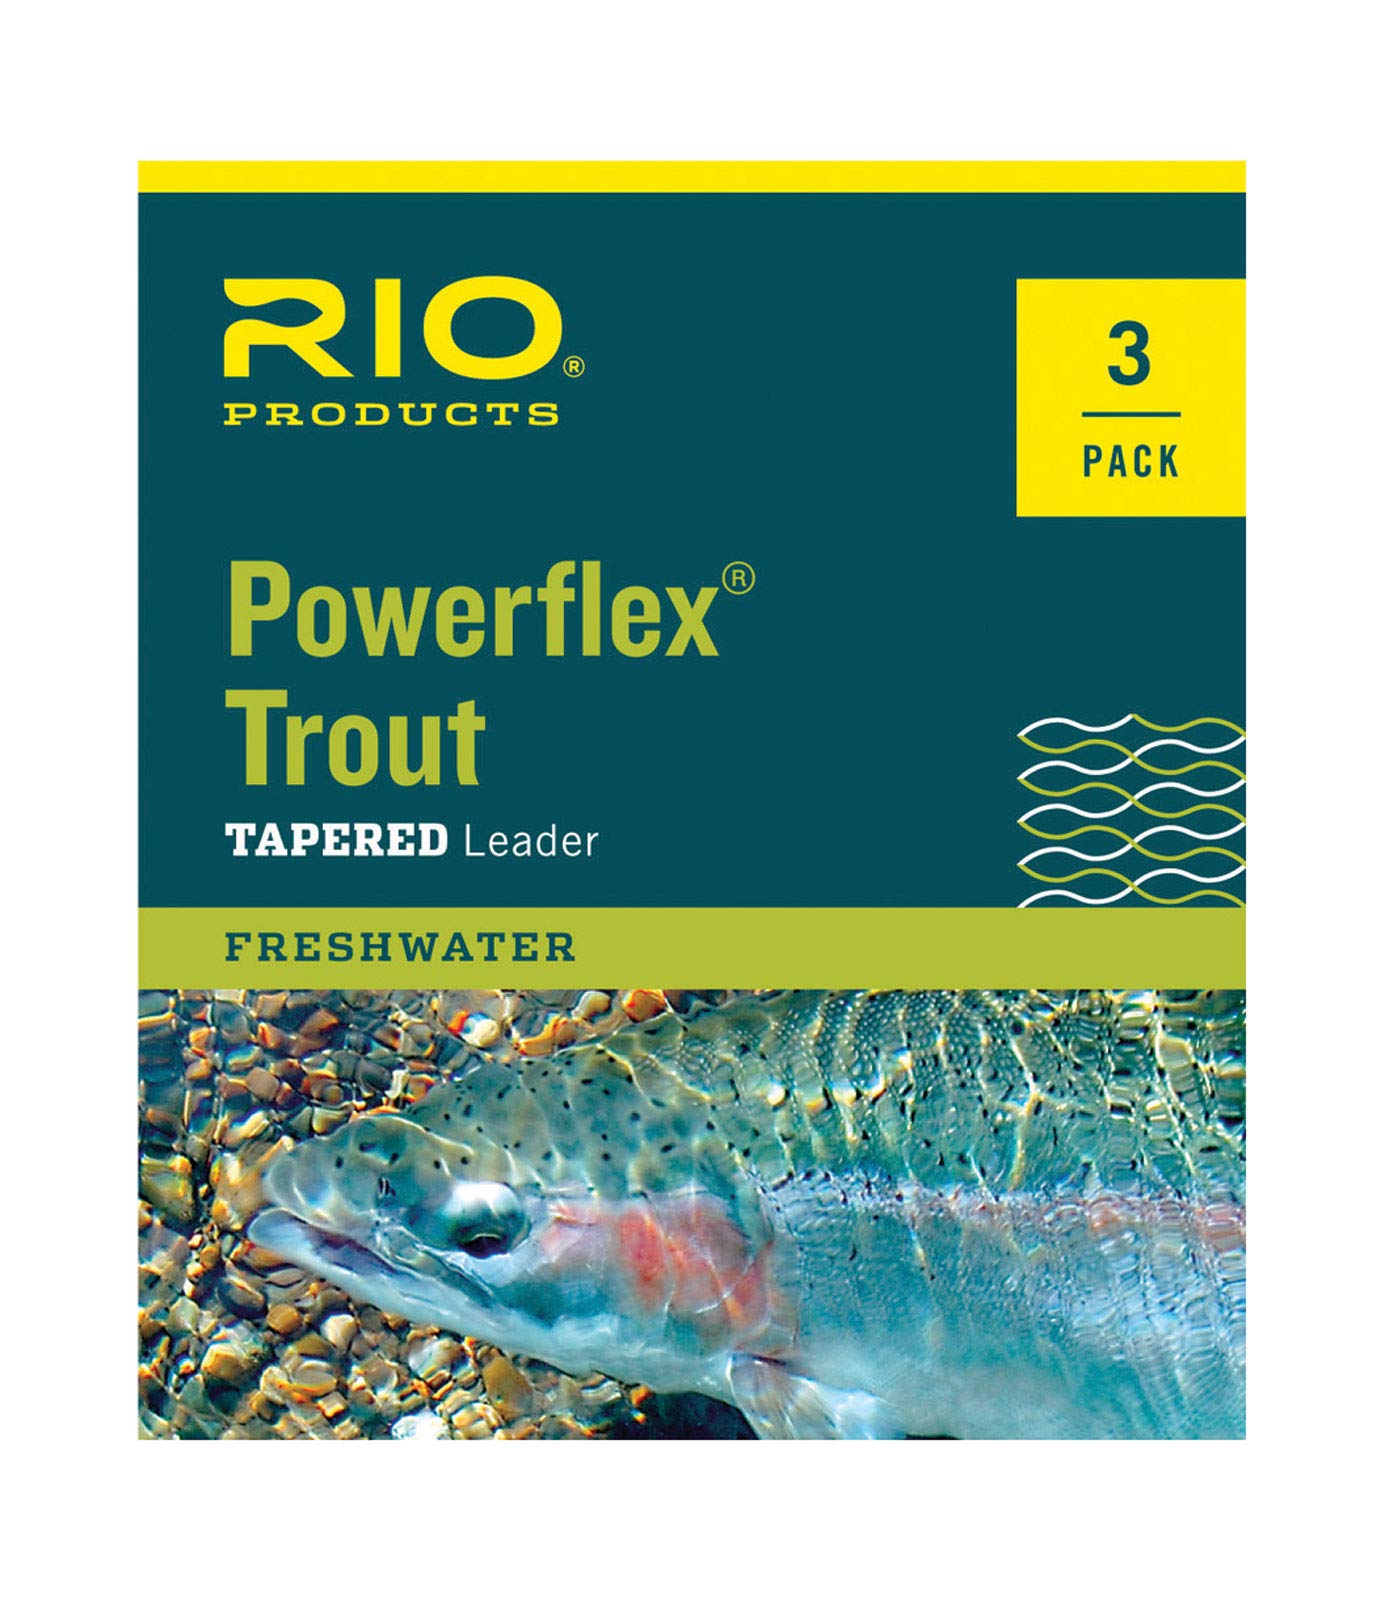 RIO Products Powerflex Trout 7.5ft Leader Freshwater Tapered Fly Line 3  Pack 7X